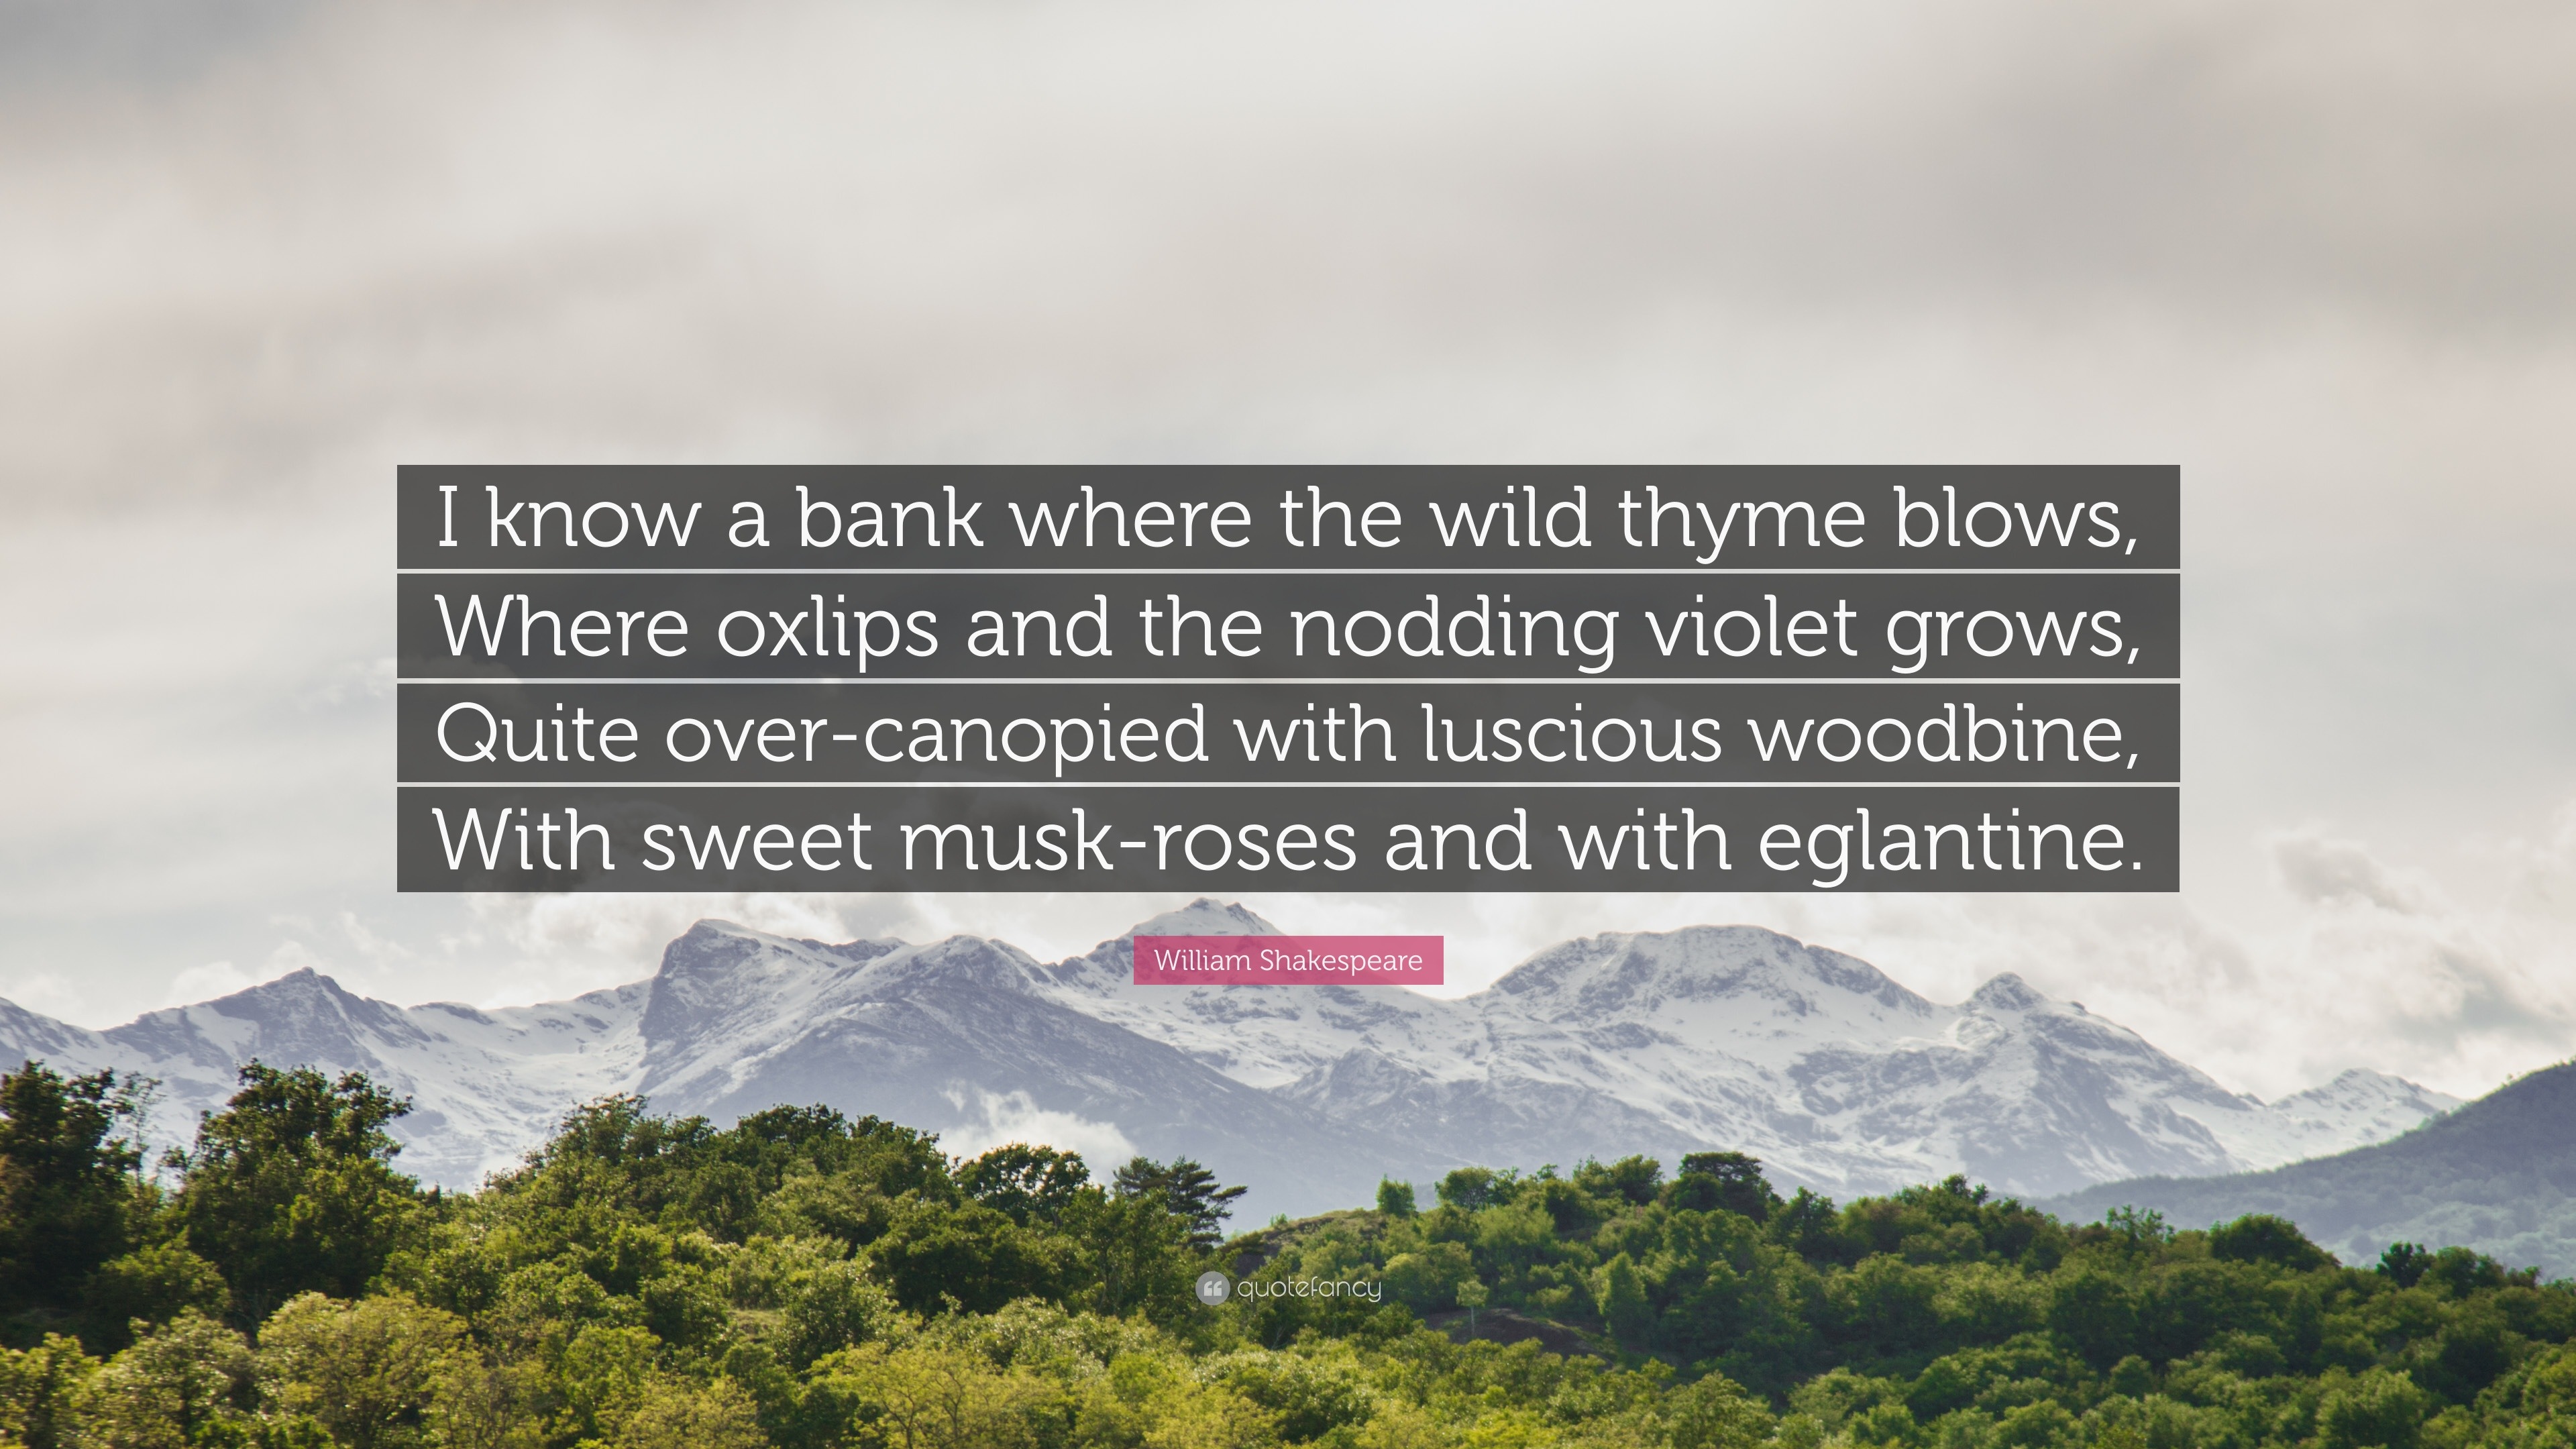 i know a bank where the wild thyme blows